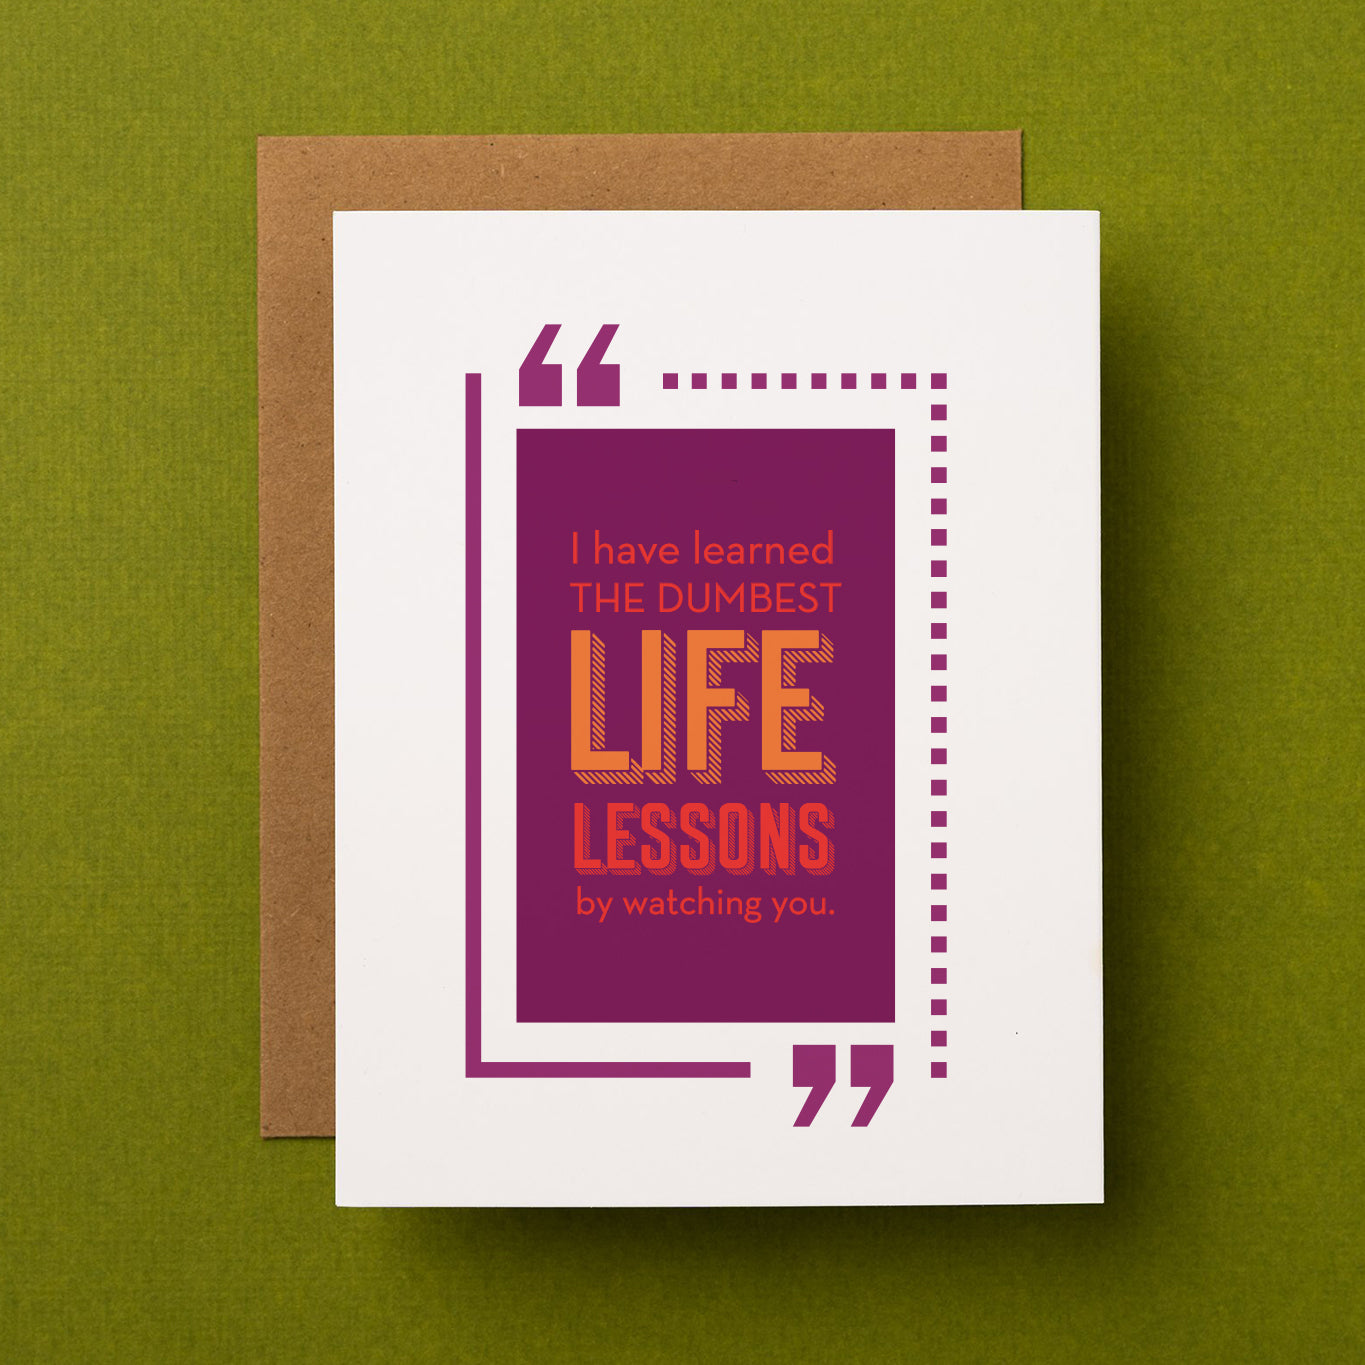 Sarcastic & Funny Friendship greeting card. The front of the greeting card reads "I have learned the dumbest life lessons by watching you"